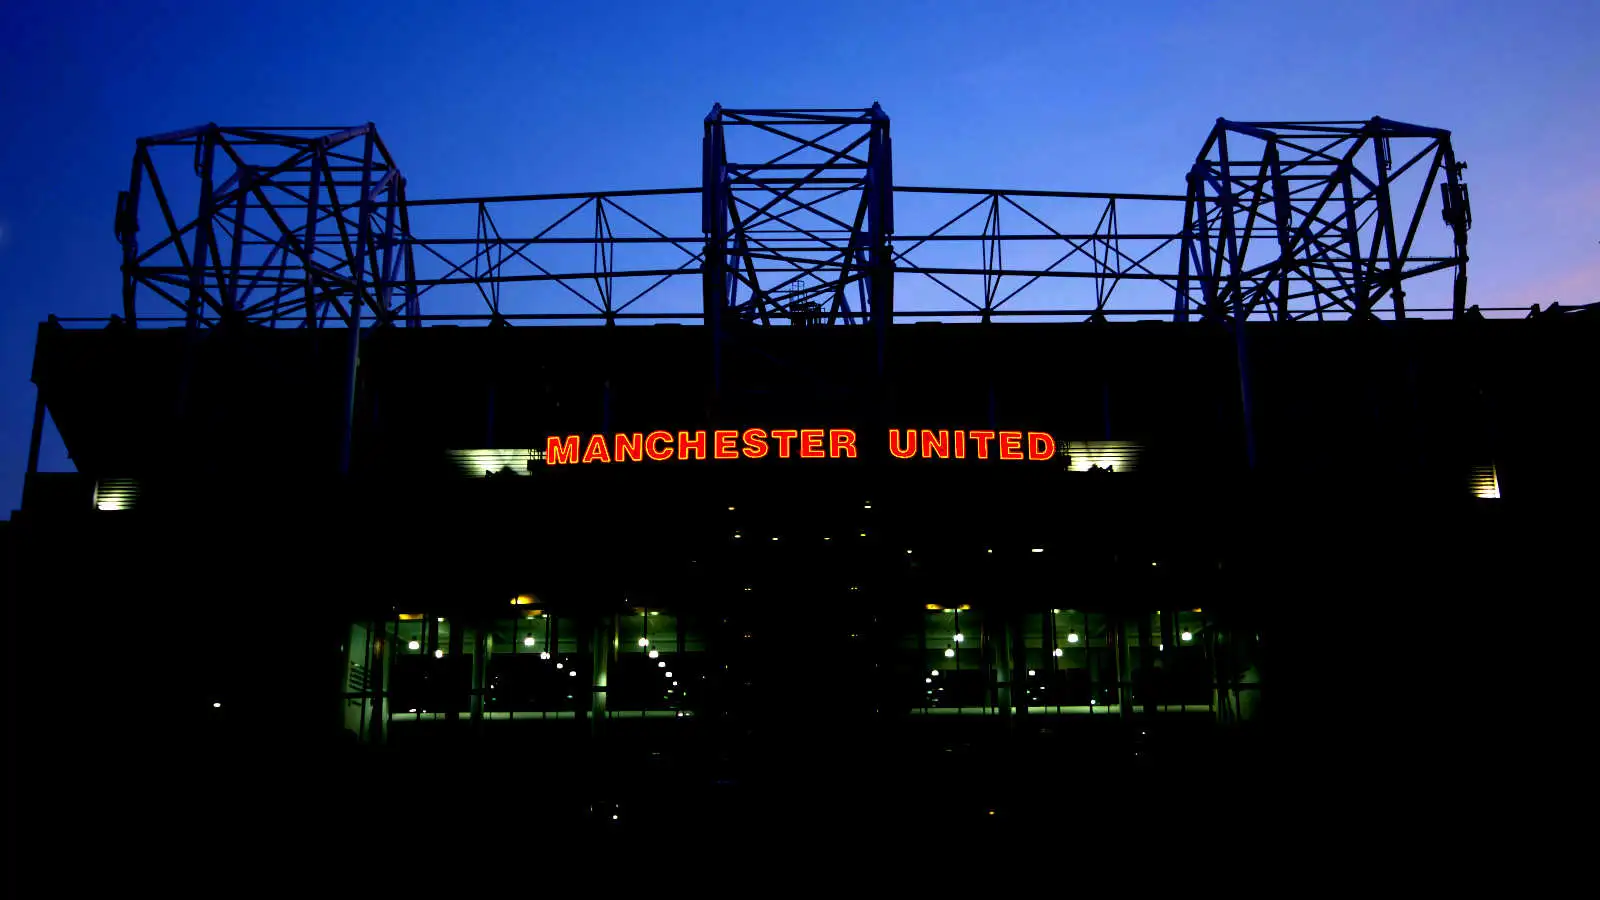 Old Trafford, home of Manchester United, at night